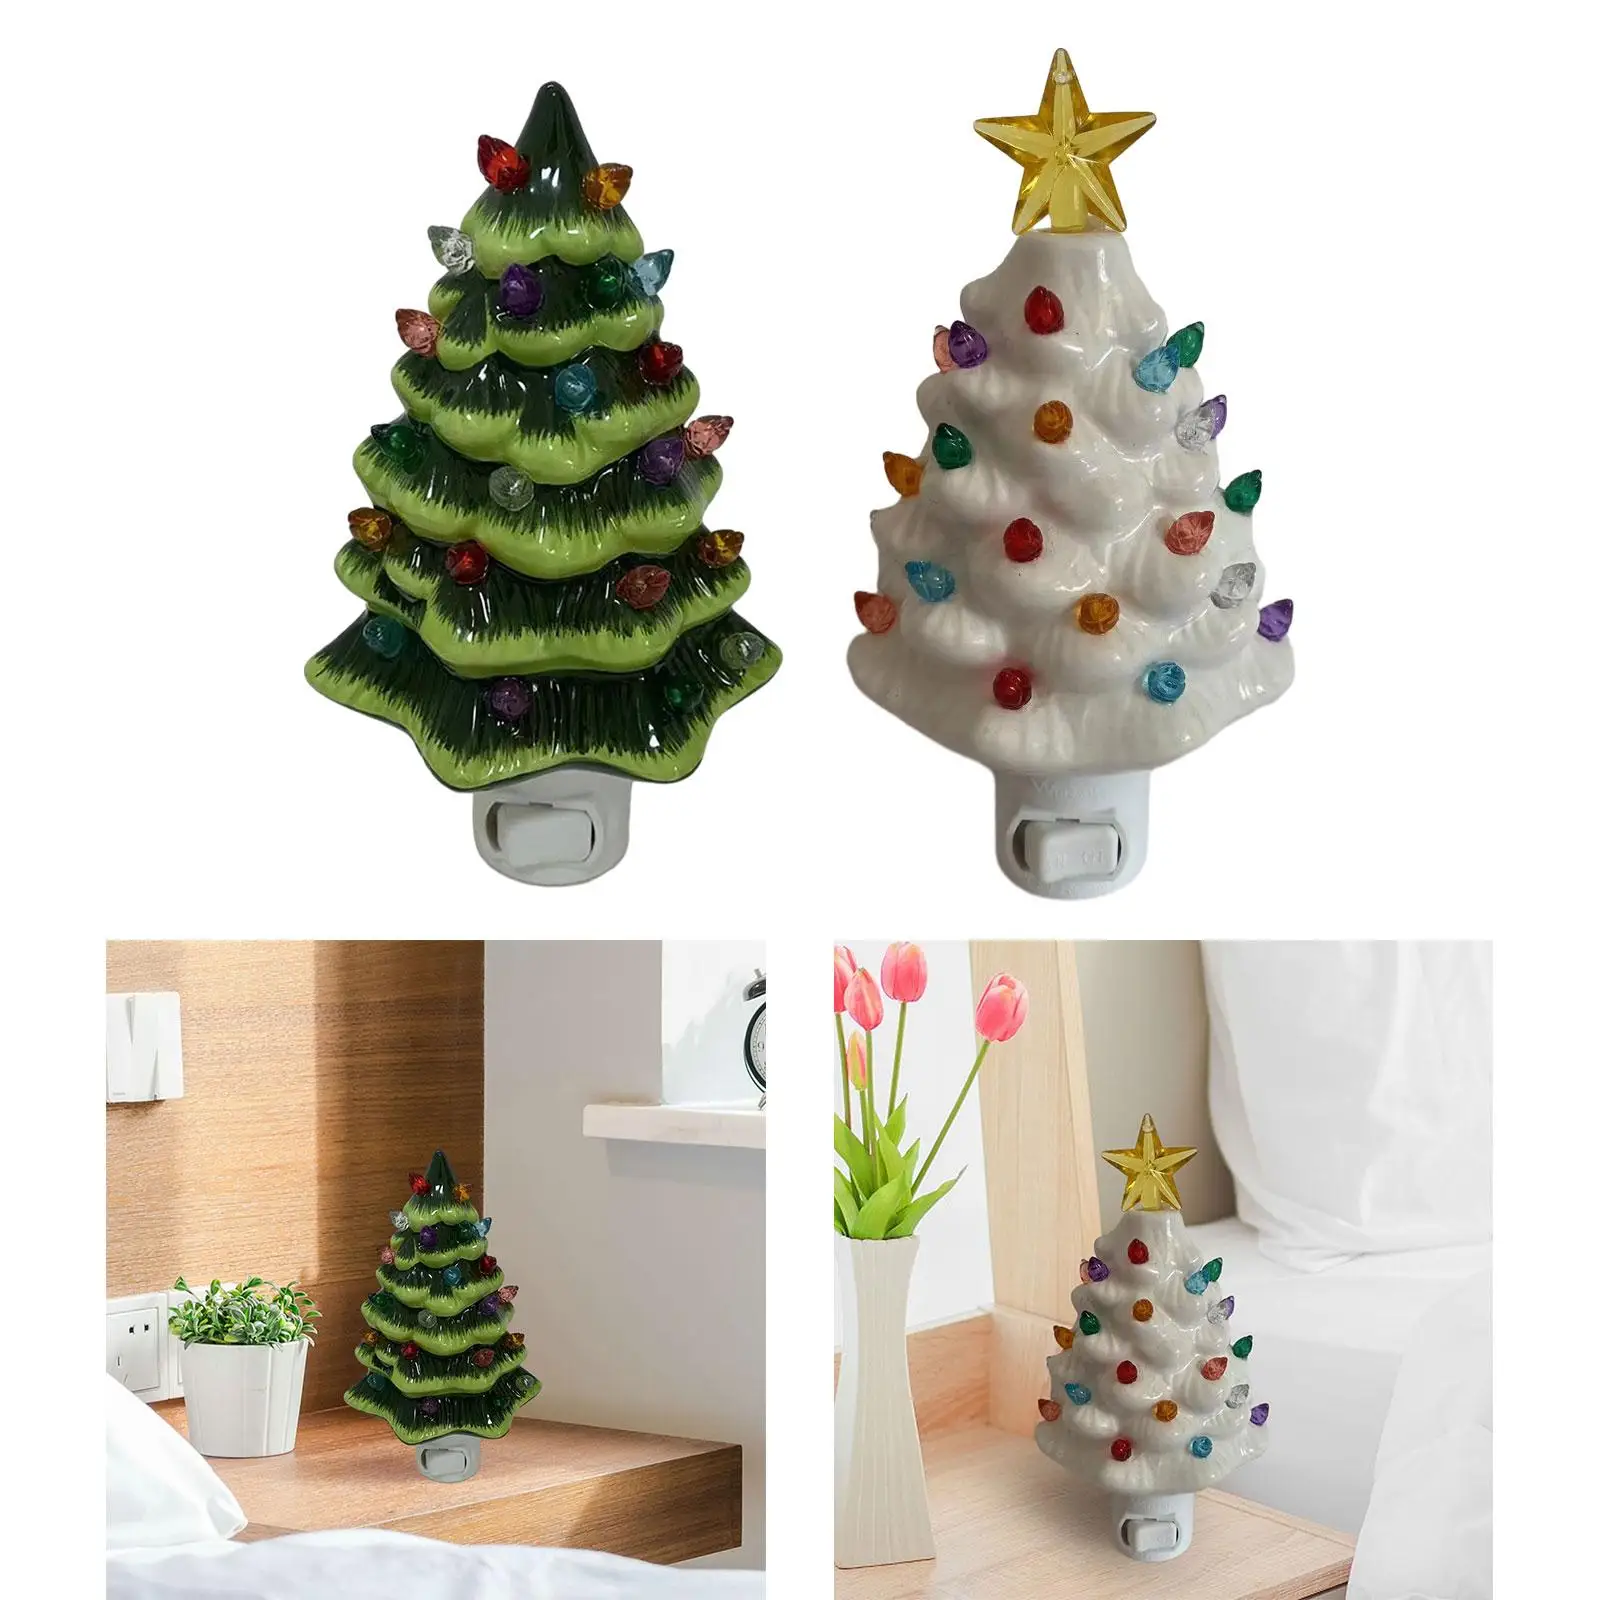 2023 Christmas Tree Night Light Ceramic with Lamp Nostalgic Xmas Decorations for Theme Party Decor Bedroom Indoor Bedside Table